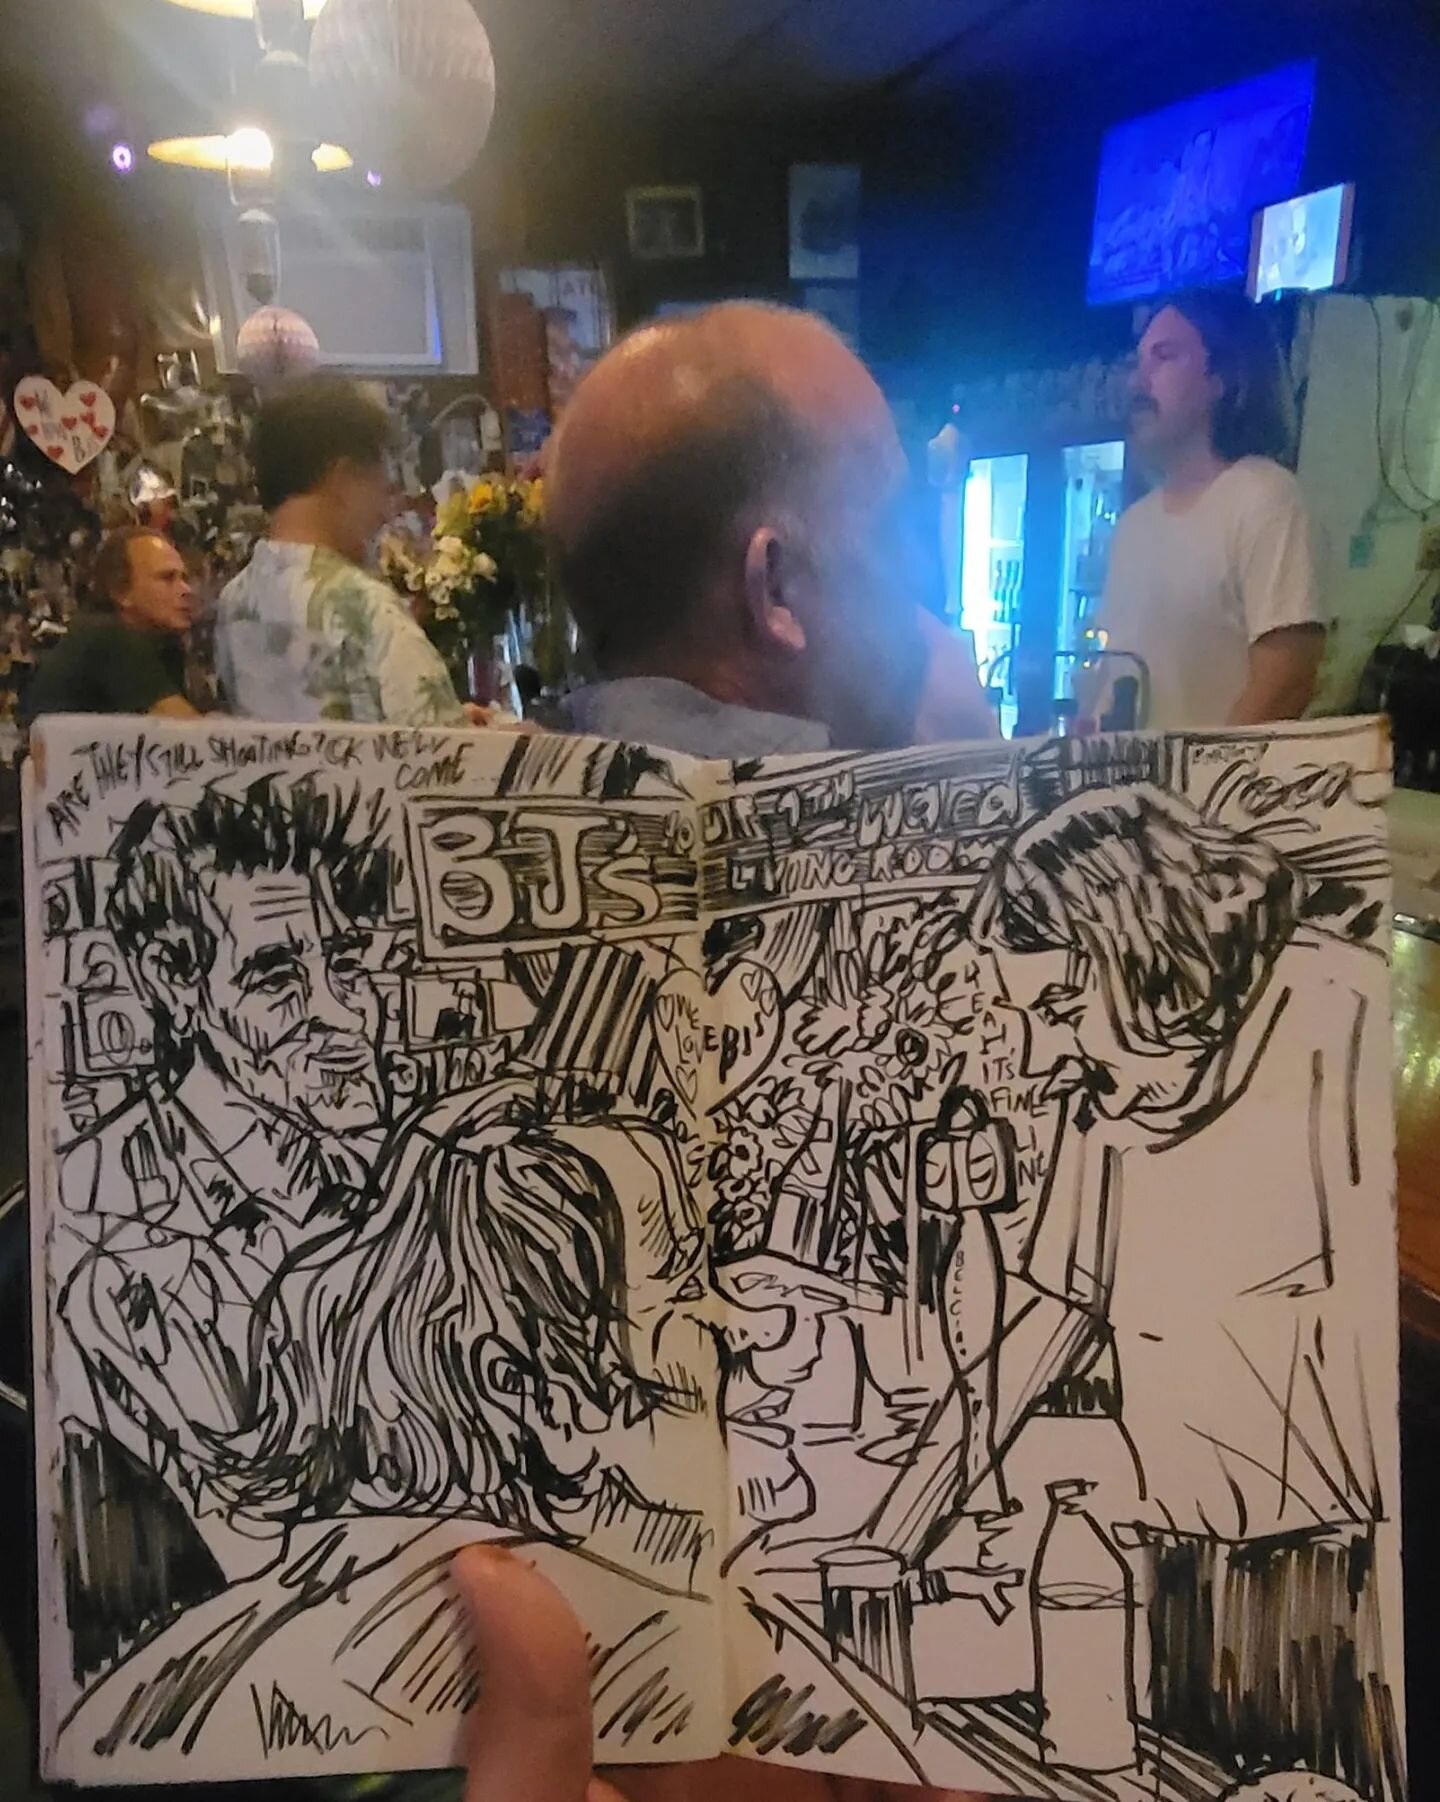 Sketches from the #BigEasy -
Switching from digital to analog, @amirocks73 #drawings from a short dip to #NewOrleans with a stop @preservationhall to catch a great popping set from @preshallband (he loves drawing #horns ), Mother's cafe for Fried Chi